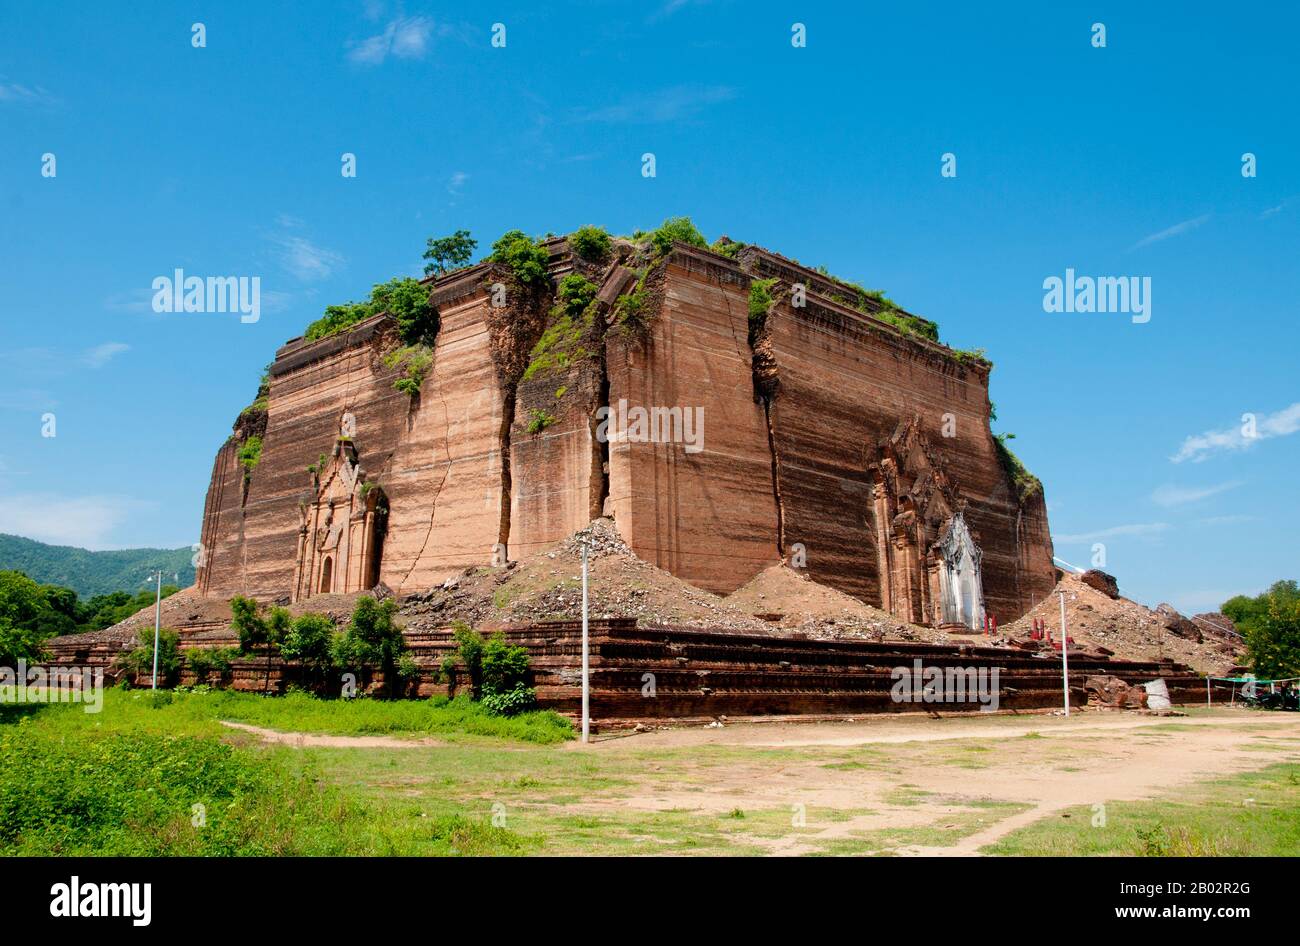 The Mingun Pahtodawgyi (Mingun Temple) was built in 1790 by King Bowdawpaya (1745 - 1819) the sixth king of the Konbaung Dyanasty. The enormous stupa was never completed and today stands at a height of 50m (164 ft). It was originally intended to be the tallest stupa in the world at a height of 150m (490 ft). Stock Photo